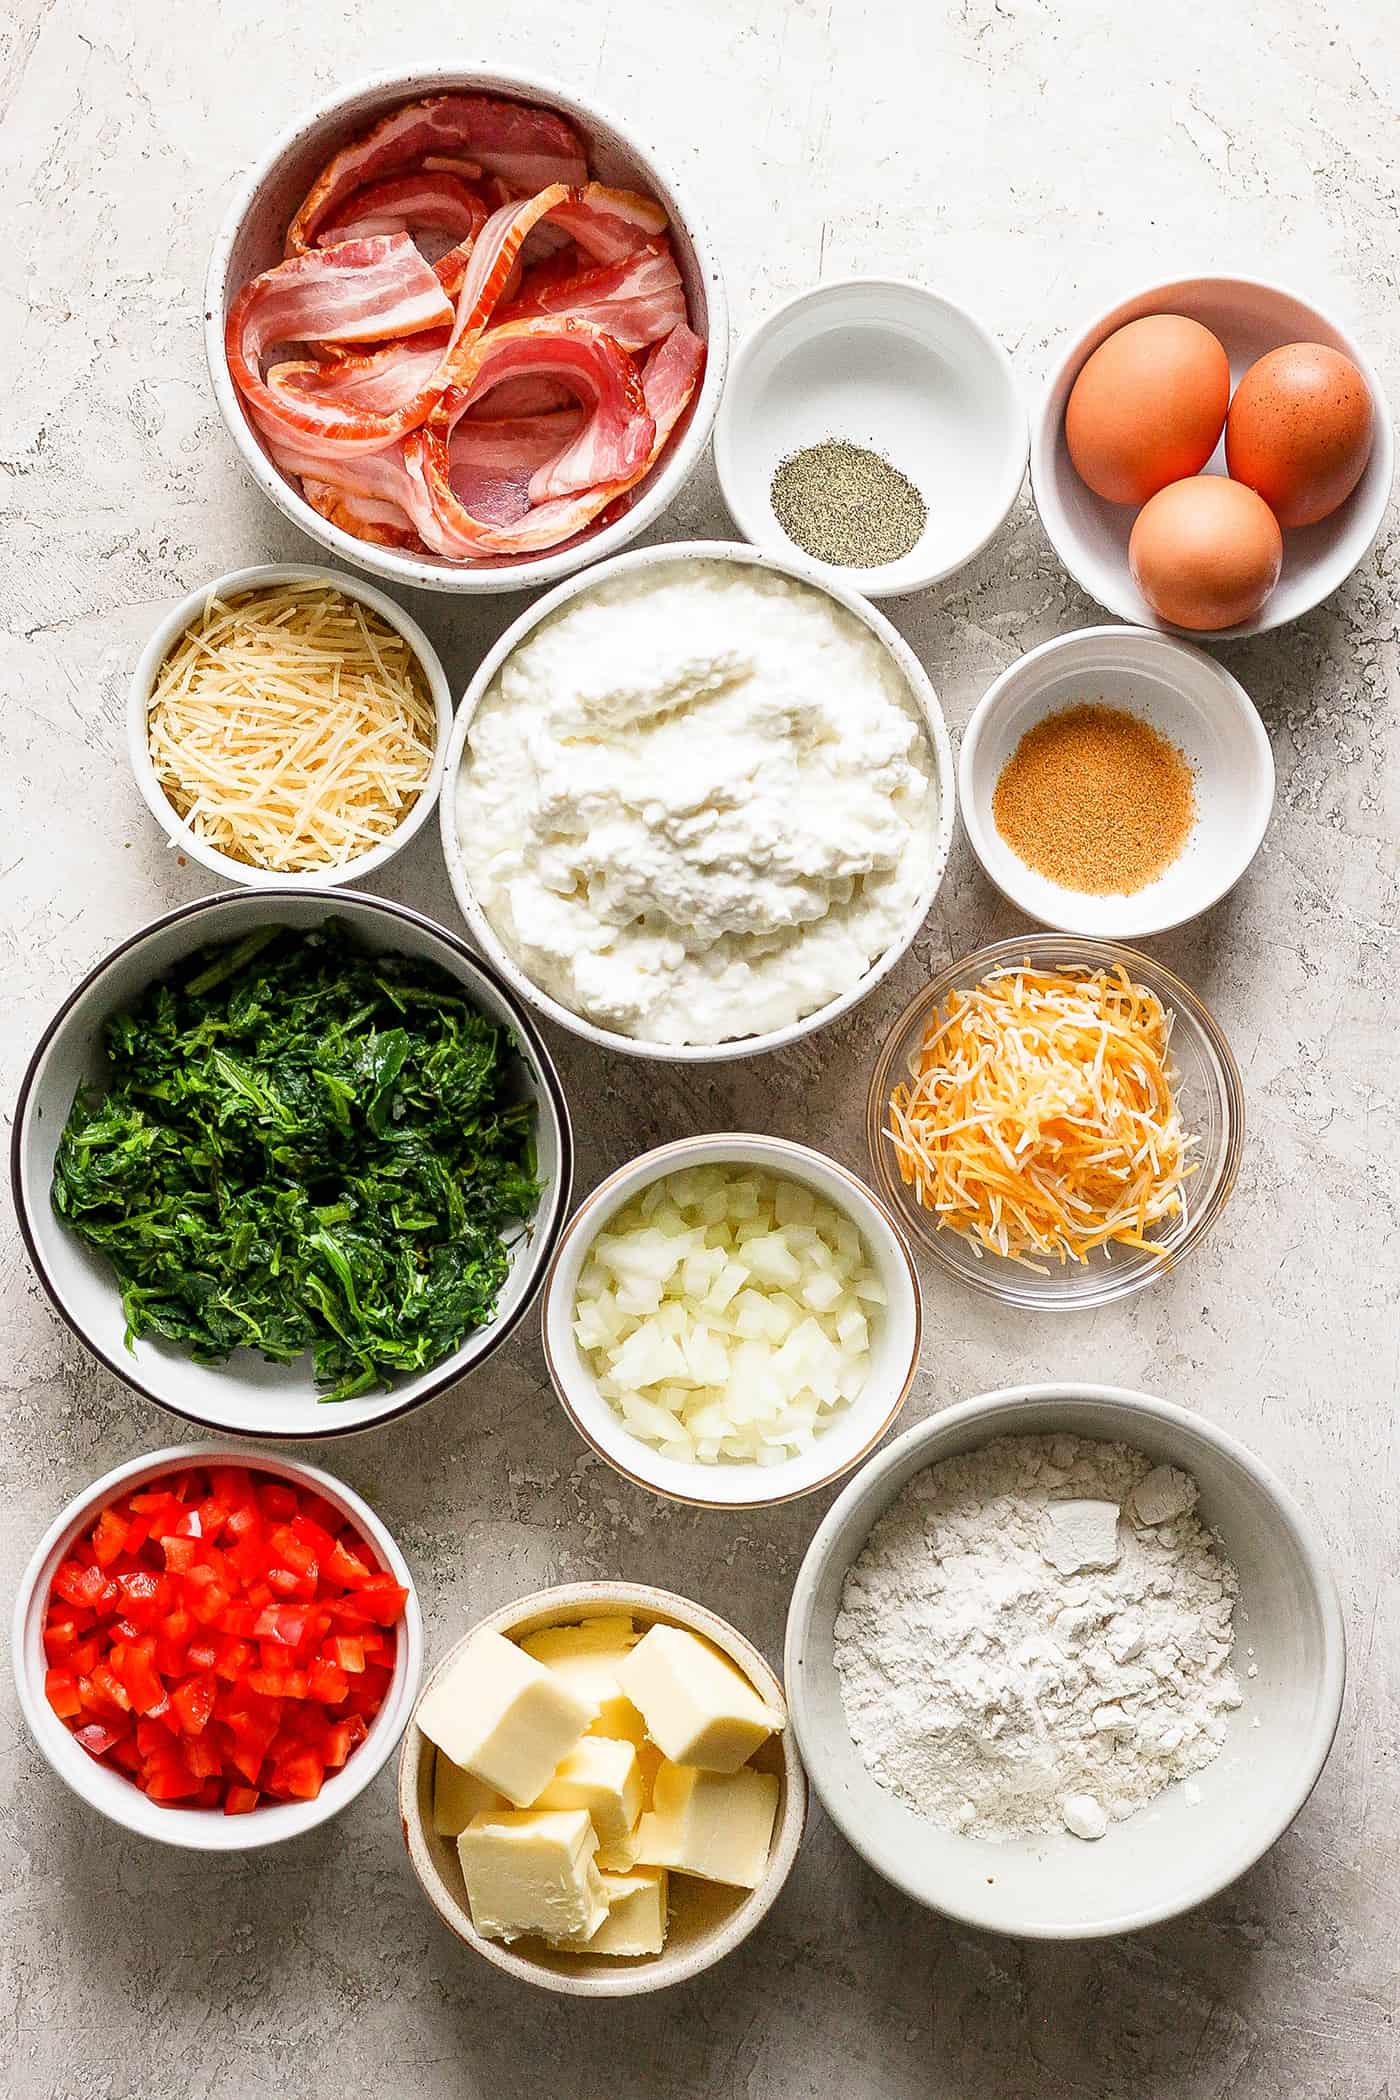 Ingredients for cottage cheese egg bake are shown portioned out: spinach, eggs, bacon, cheeses, flour, pepper, onion.